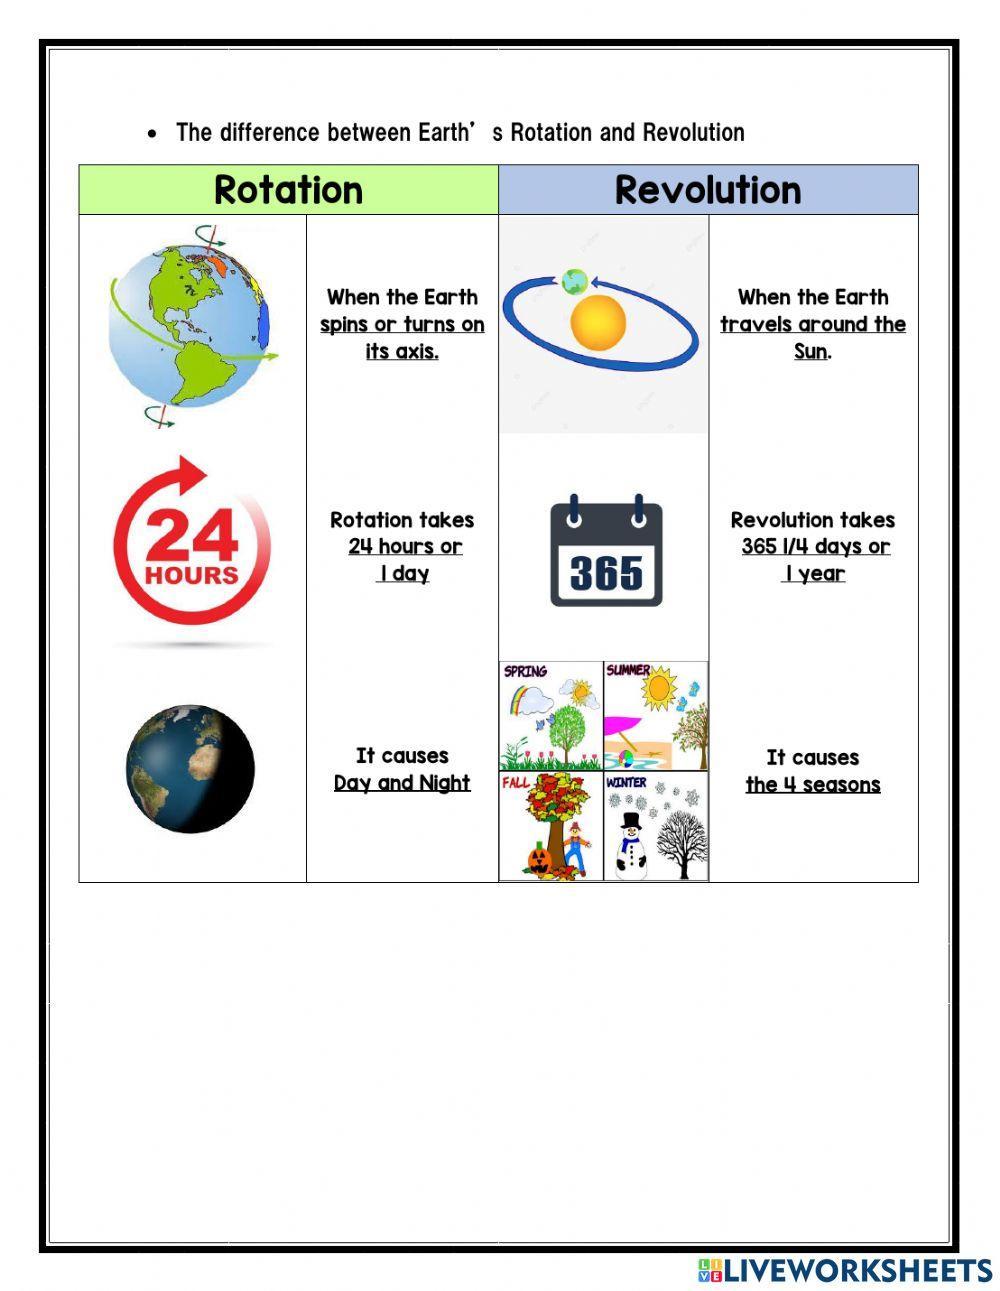 The differences between Earth Rotation and Revolution